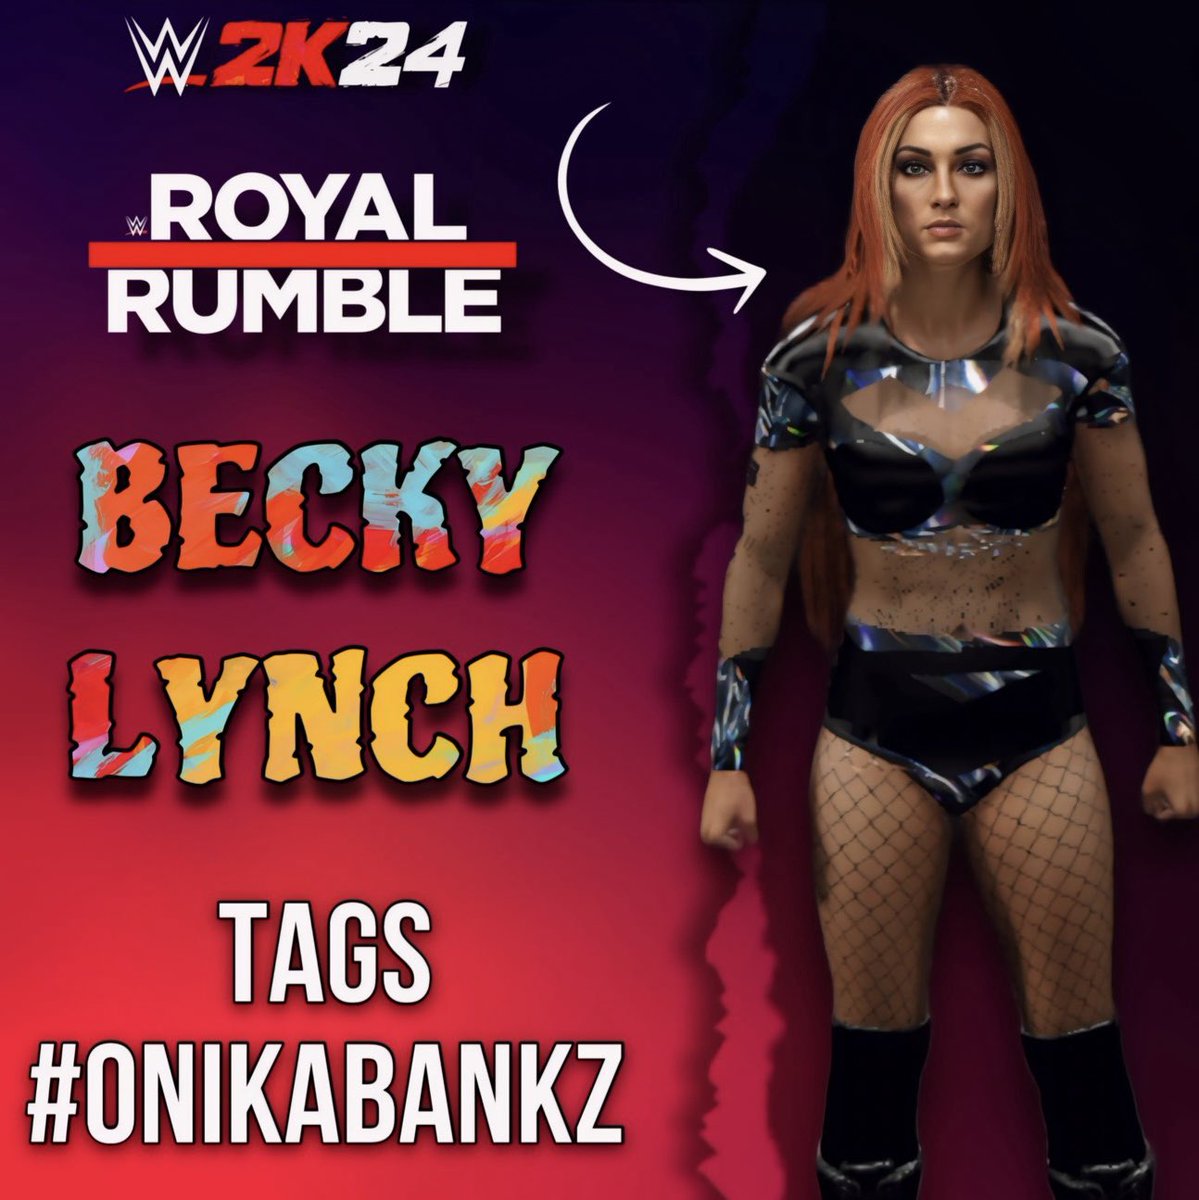 @BeckyLynchWWE RR Gear is now available for download on WWE2K24 CC! 🌌 

Tags - #onikabankz 

#nxt #nxtuk #wwe #wwegames #wwe2k #wwe2k24 #beckylynch #beckylynchwwe #impactwrestling #aew #aewdynamite